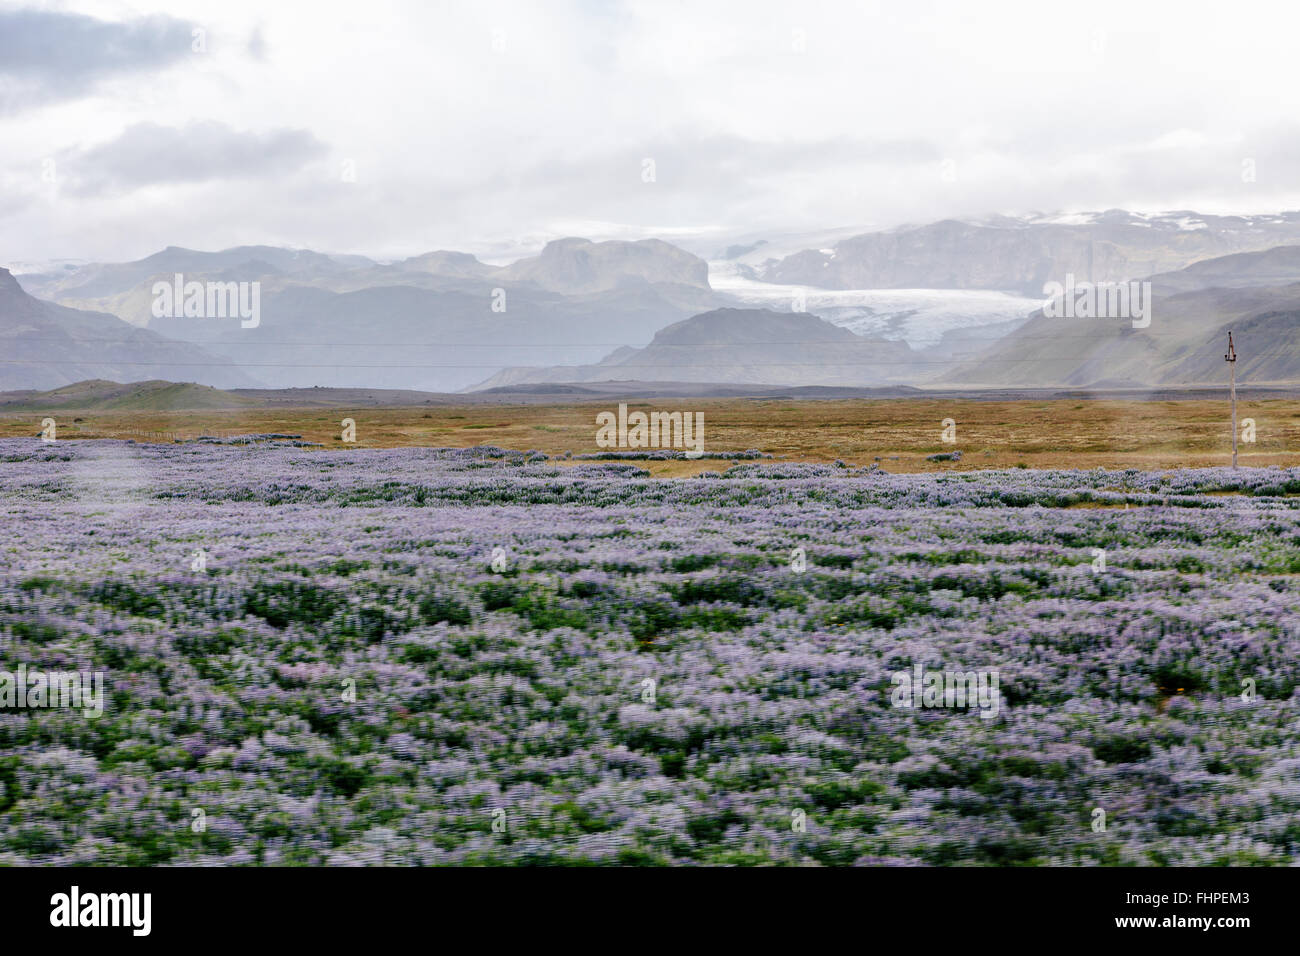 View of a field glaciers and lupin flowers on a roadtrip through Iceland on a rainy day. Stock Photo